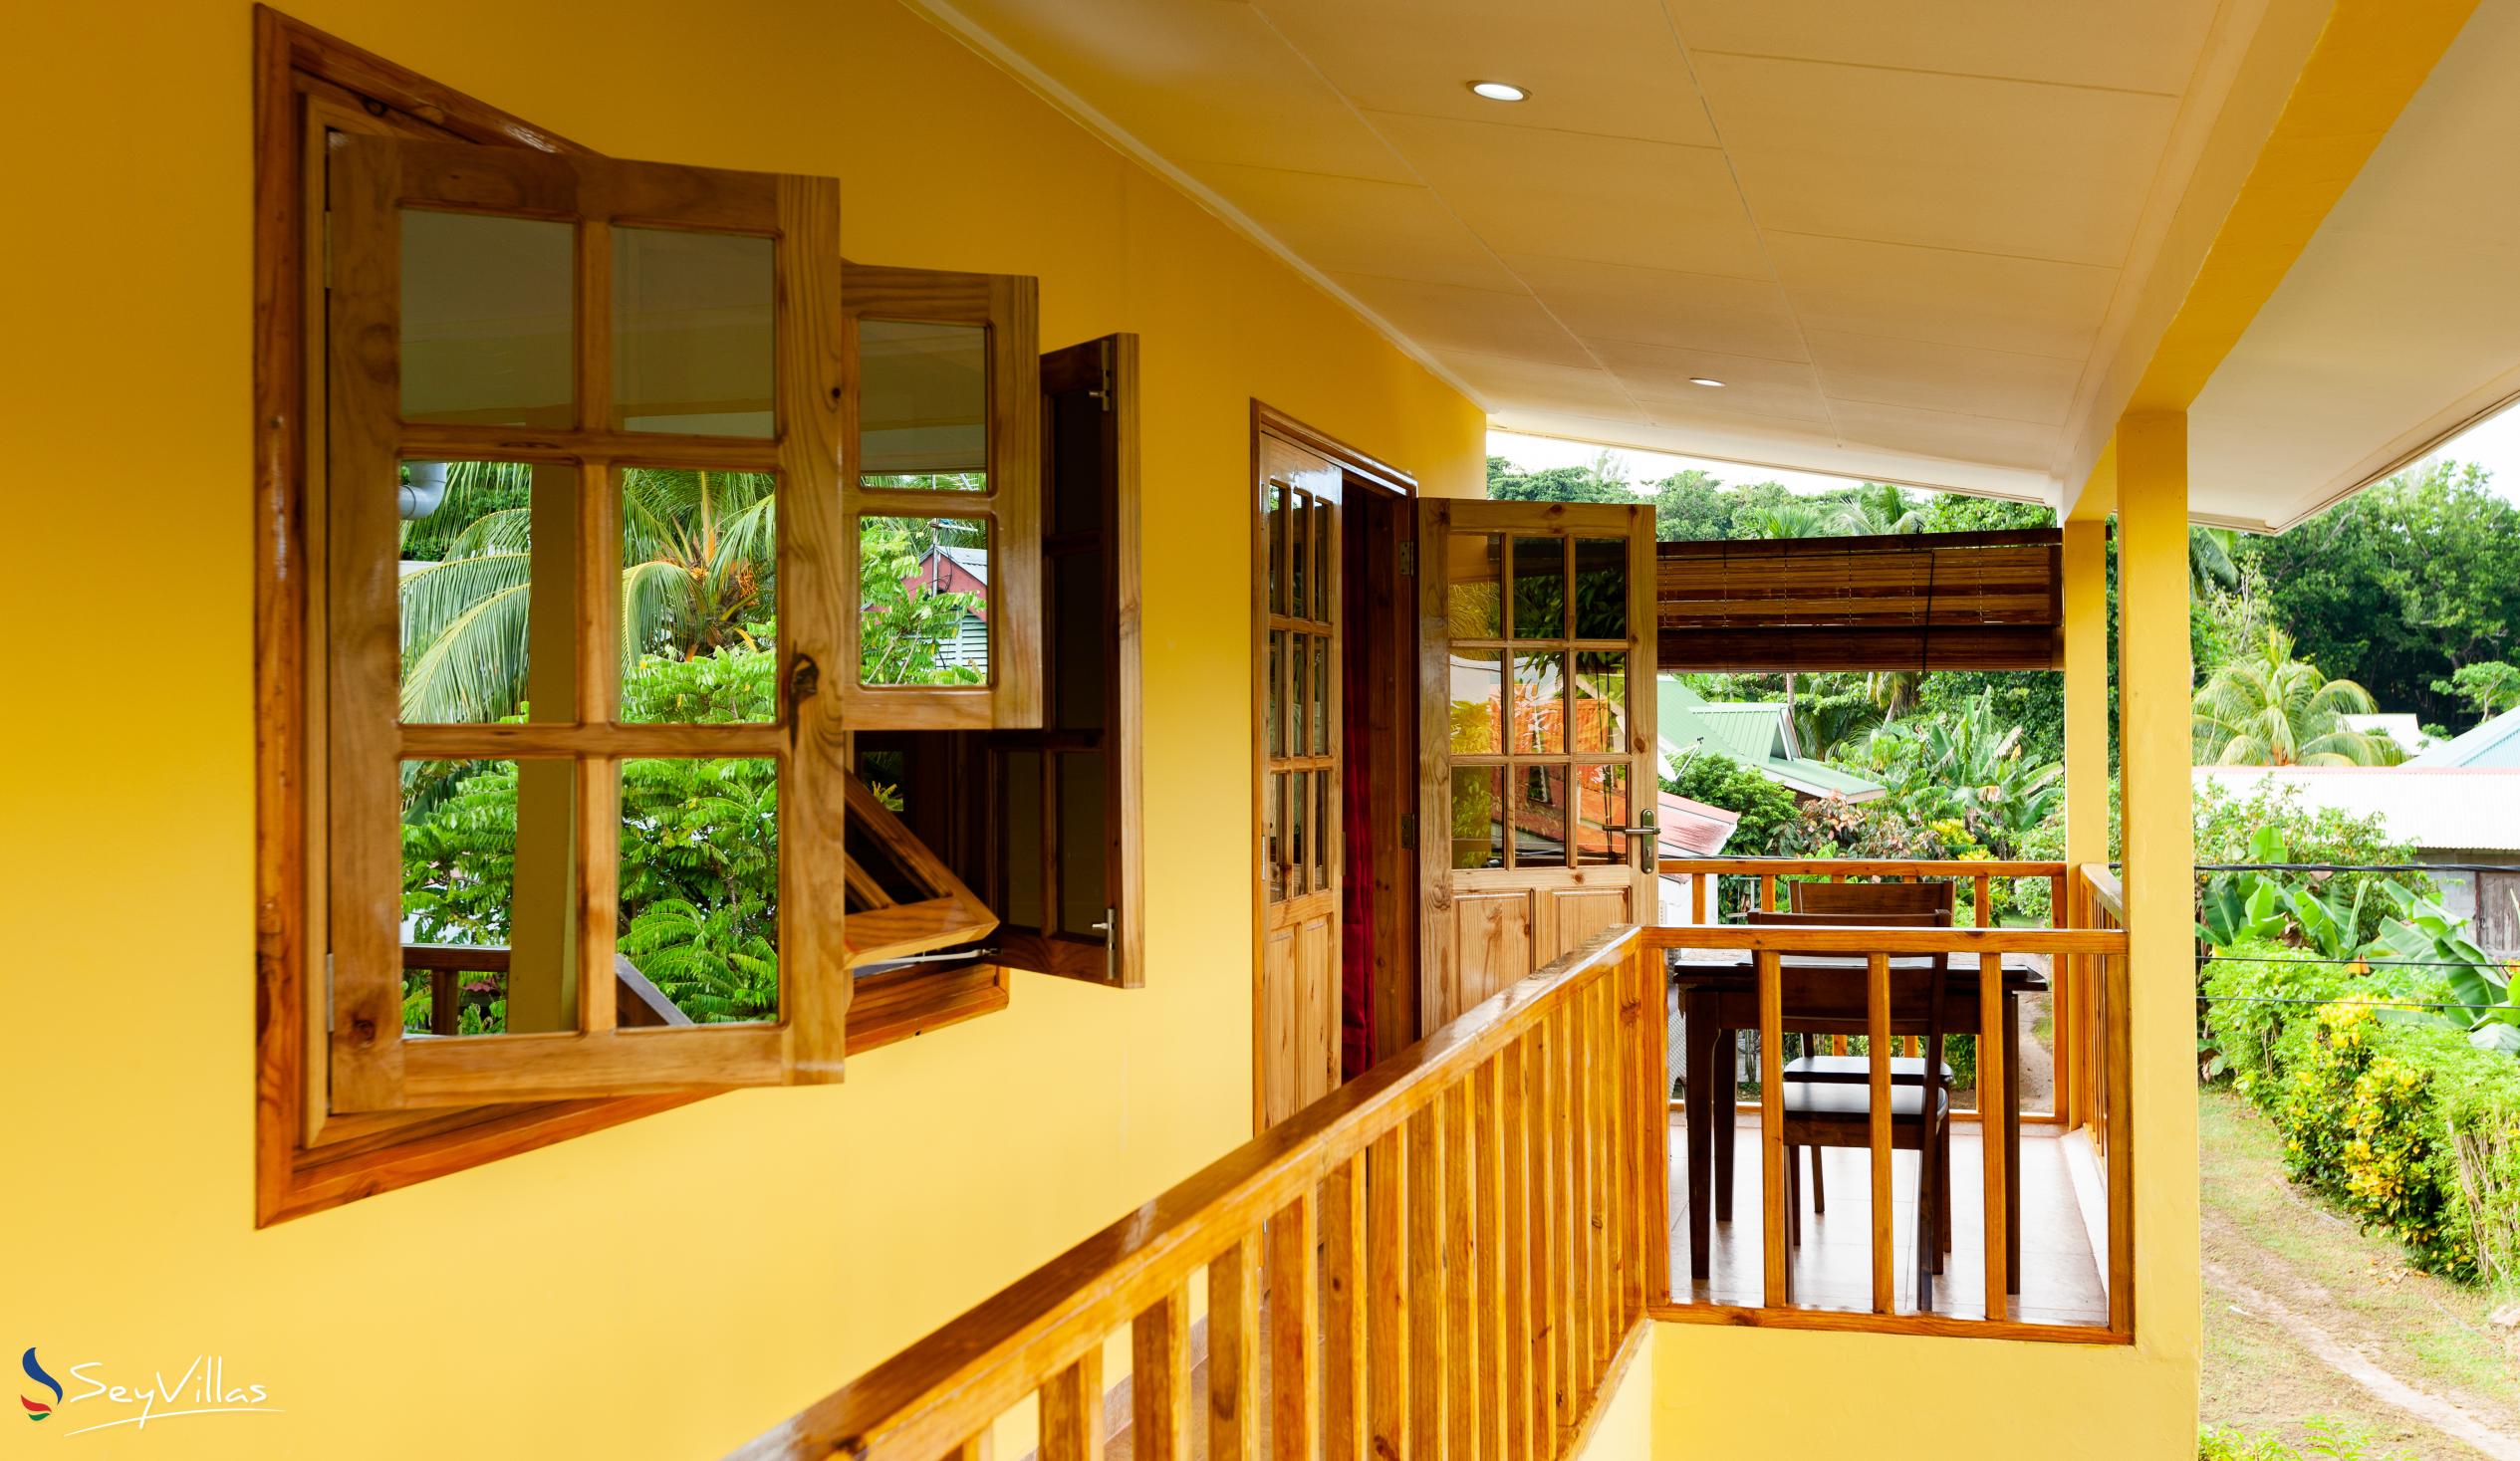 Foto 21: Dream Holiday Self Catering - Appartement Familial - La Digue (Seychelles)